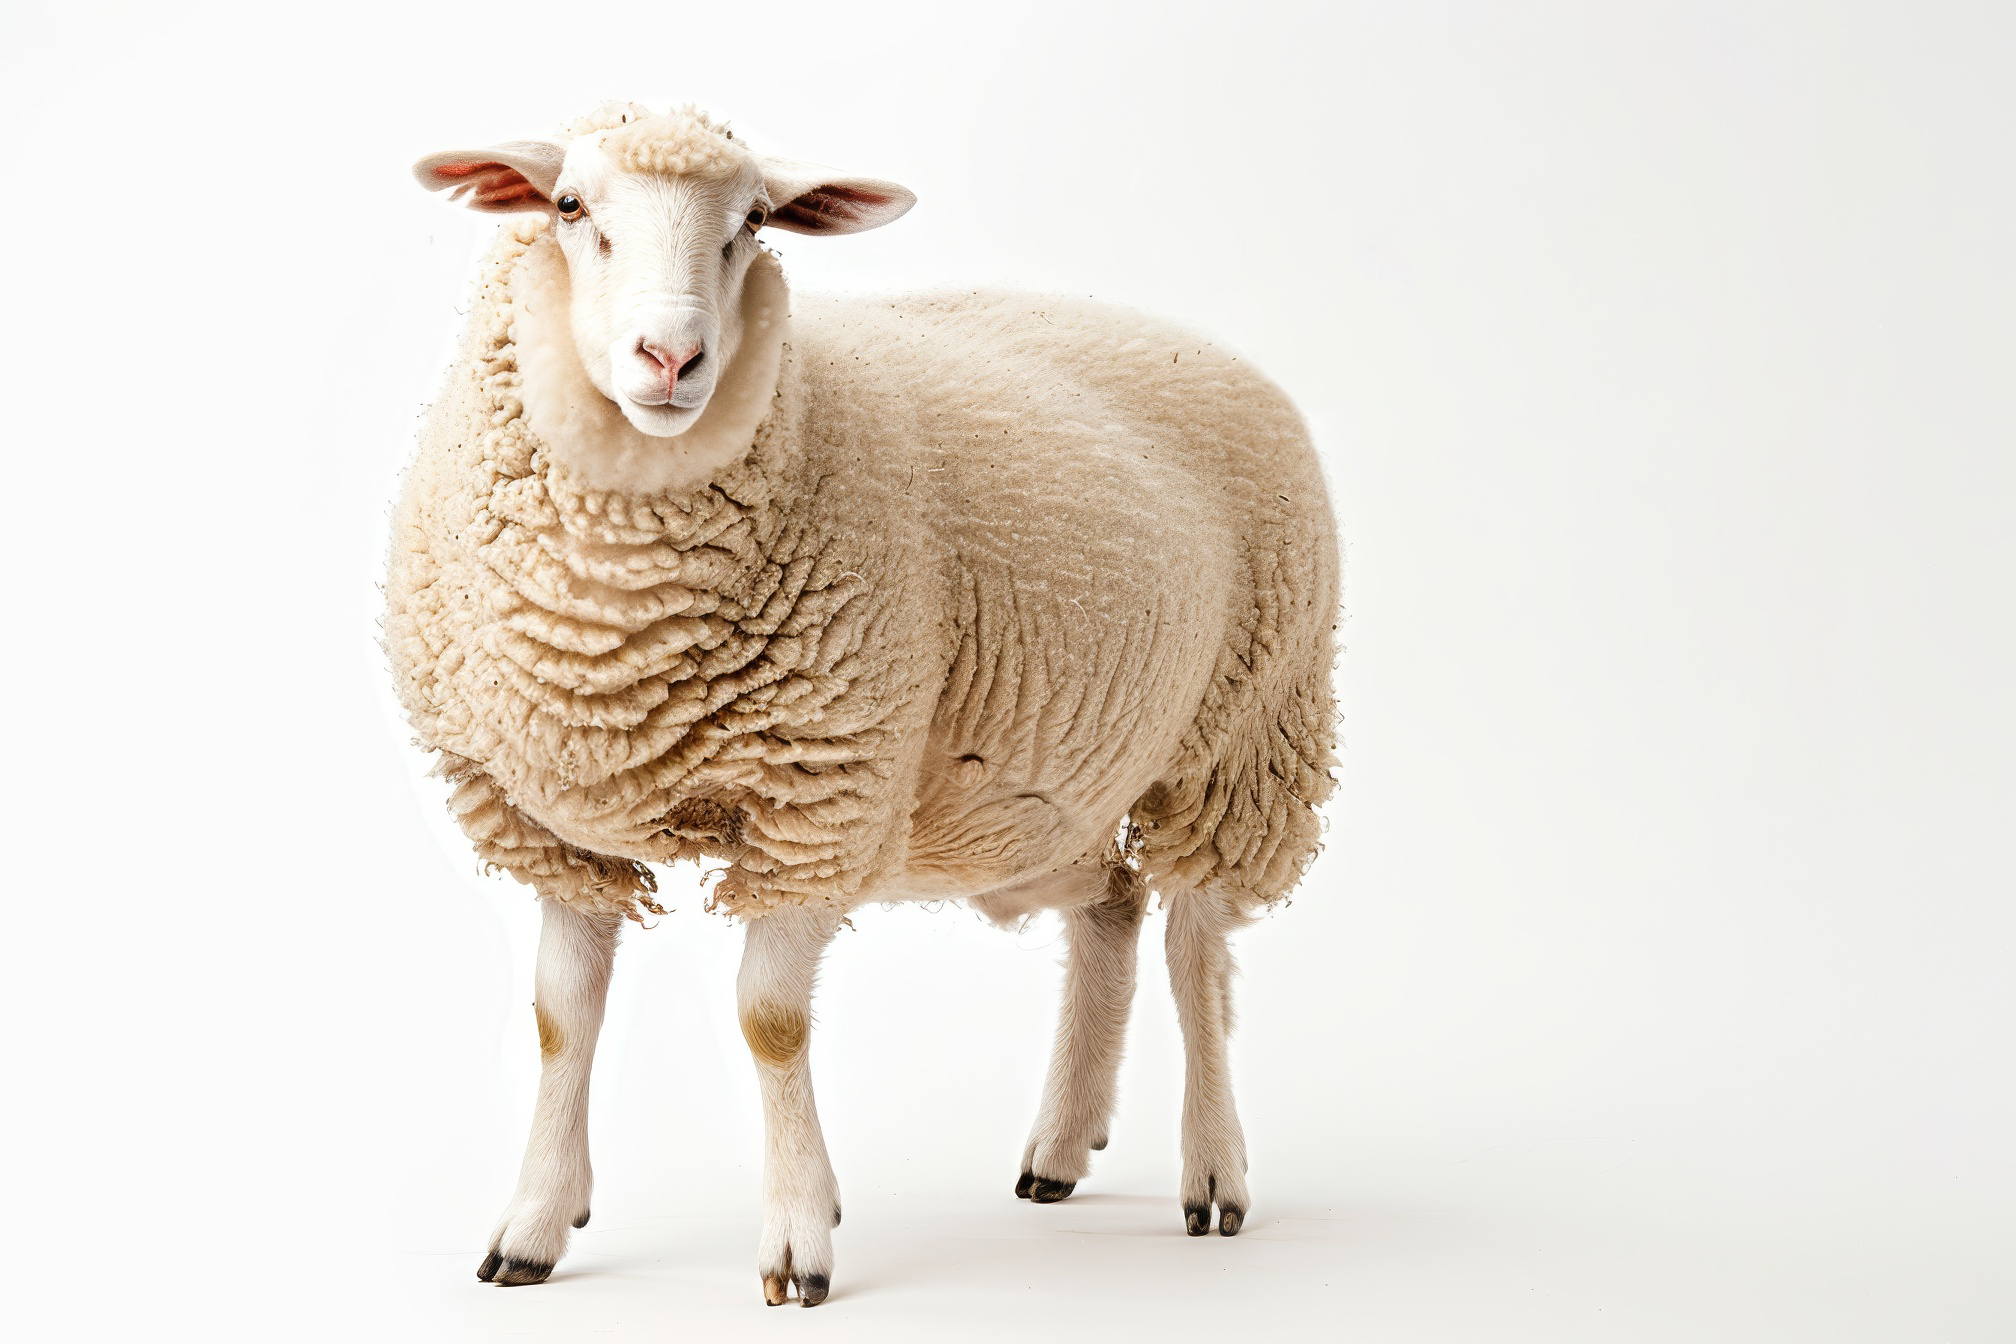 White sheep looking at camera on white background